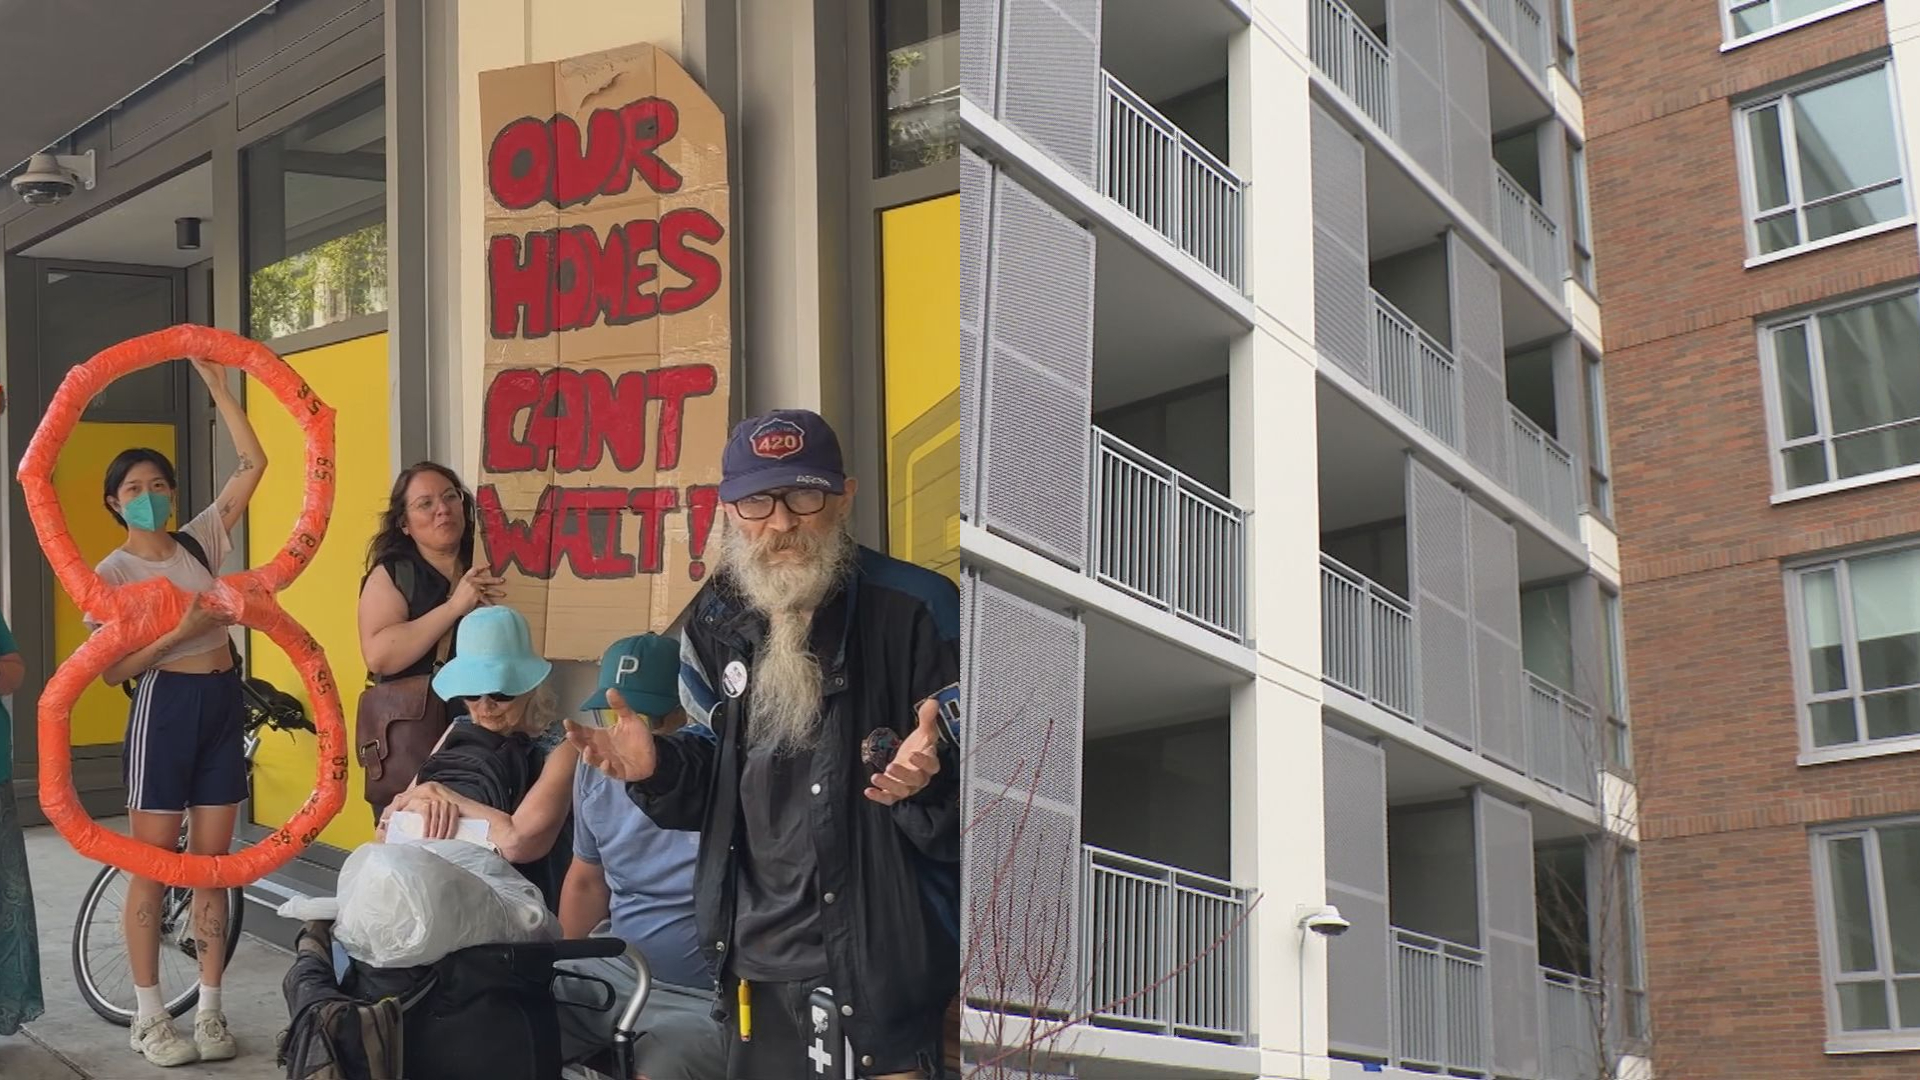 Advocates frustrated by application process for social housing